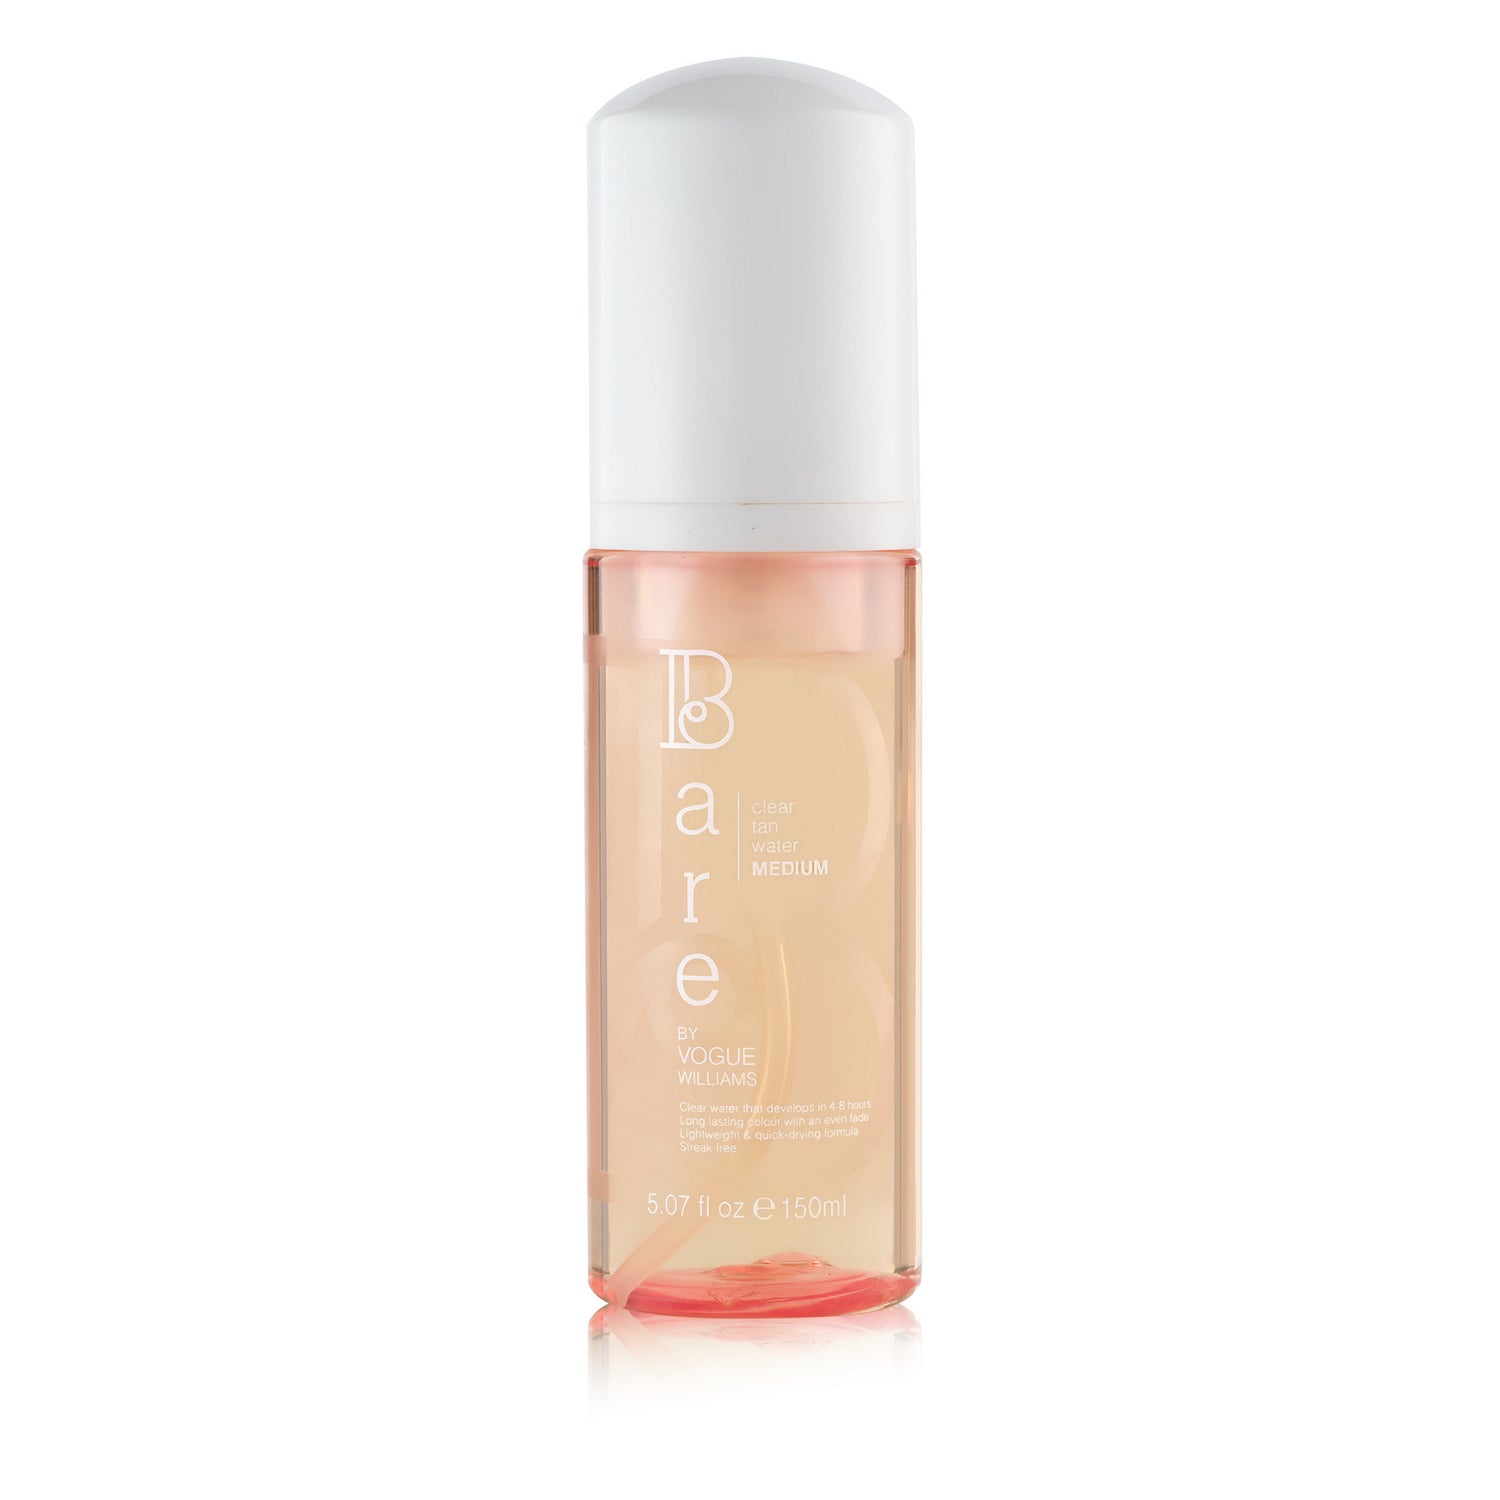 Bare by Vogue - Clear Tan Water - Medium